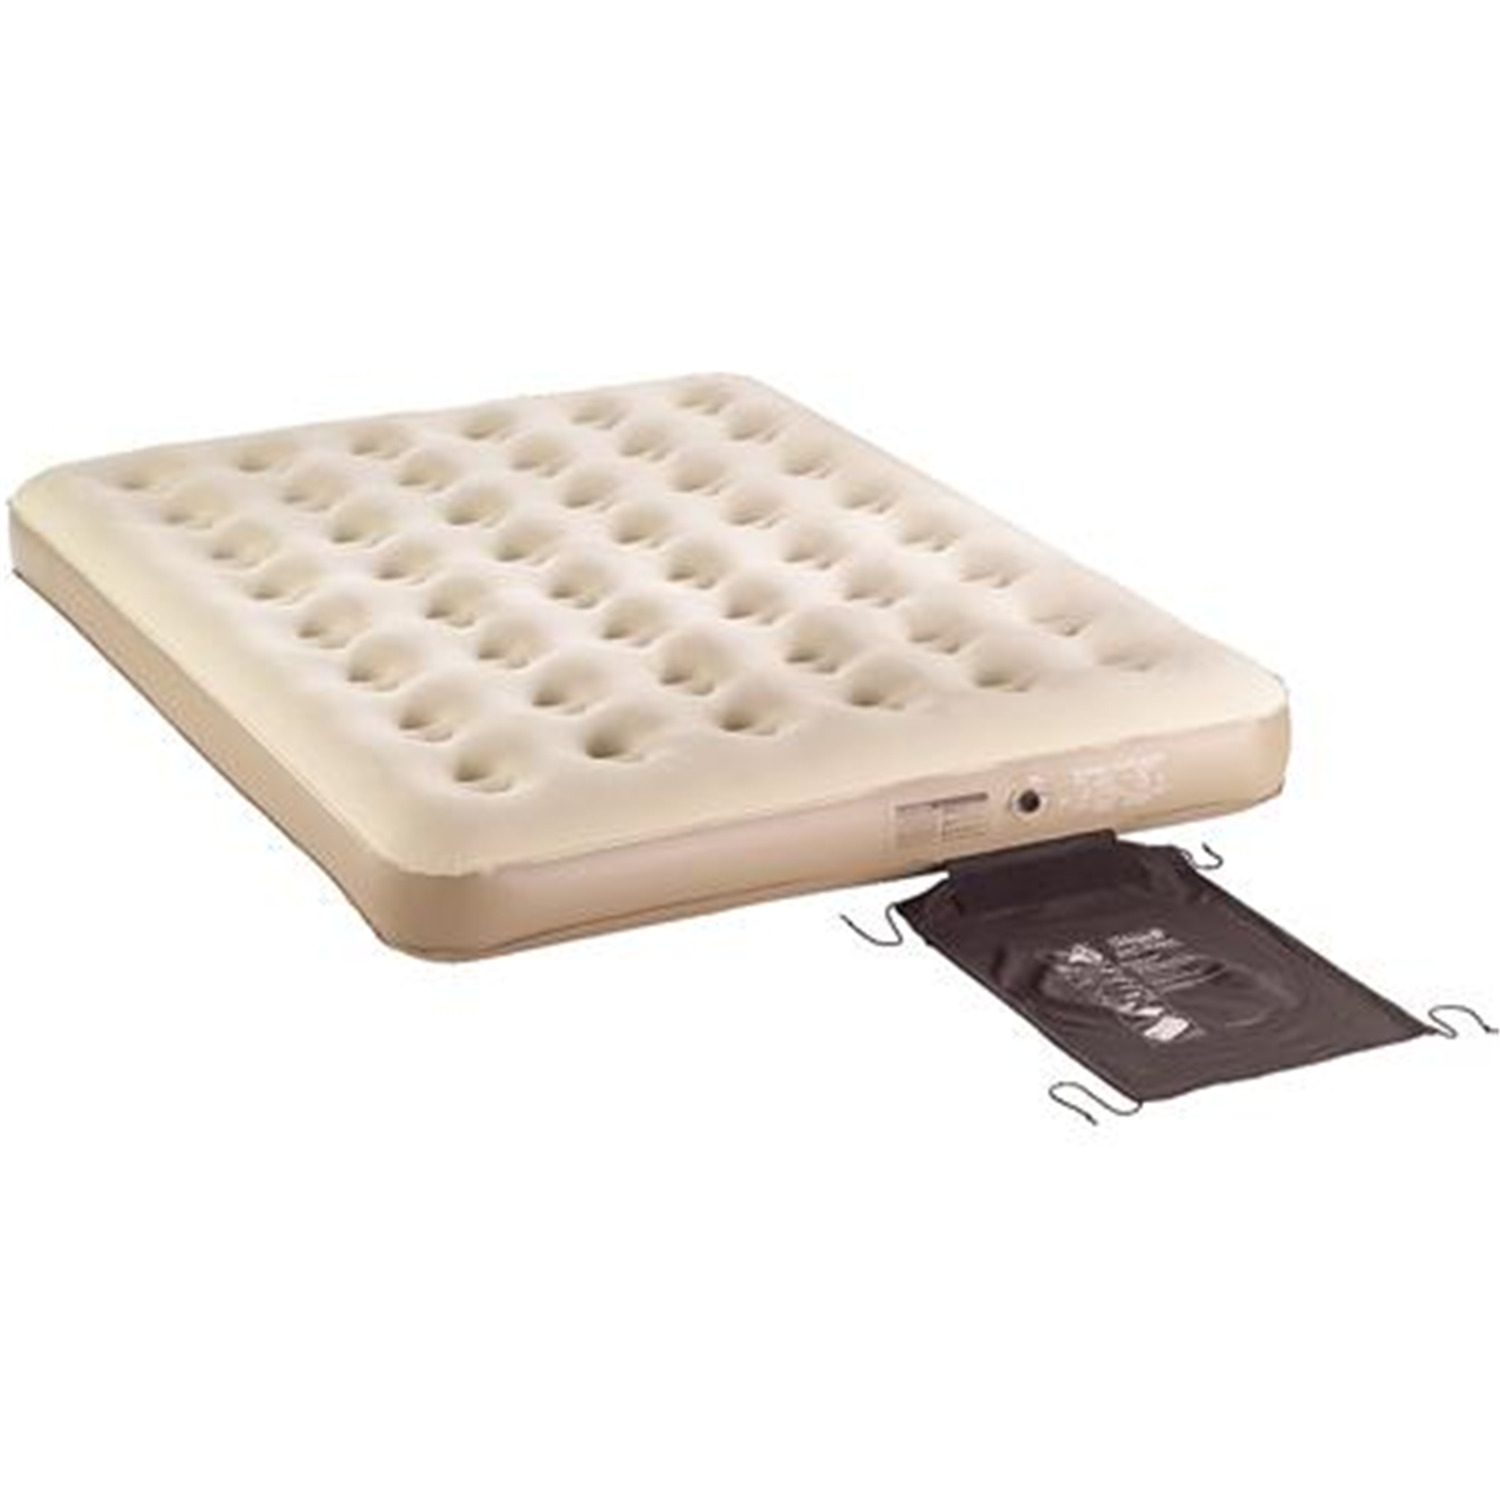 Inflatable Mattress-Size:Queen - image 2 of 3